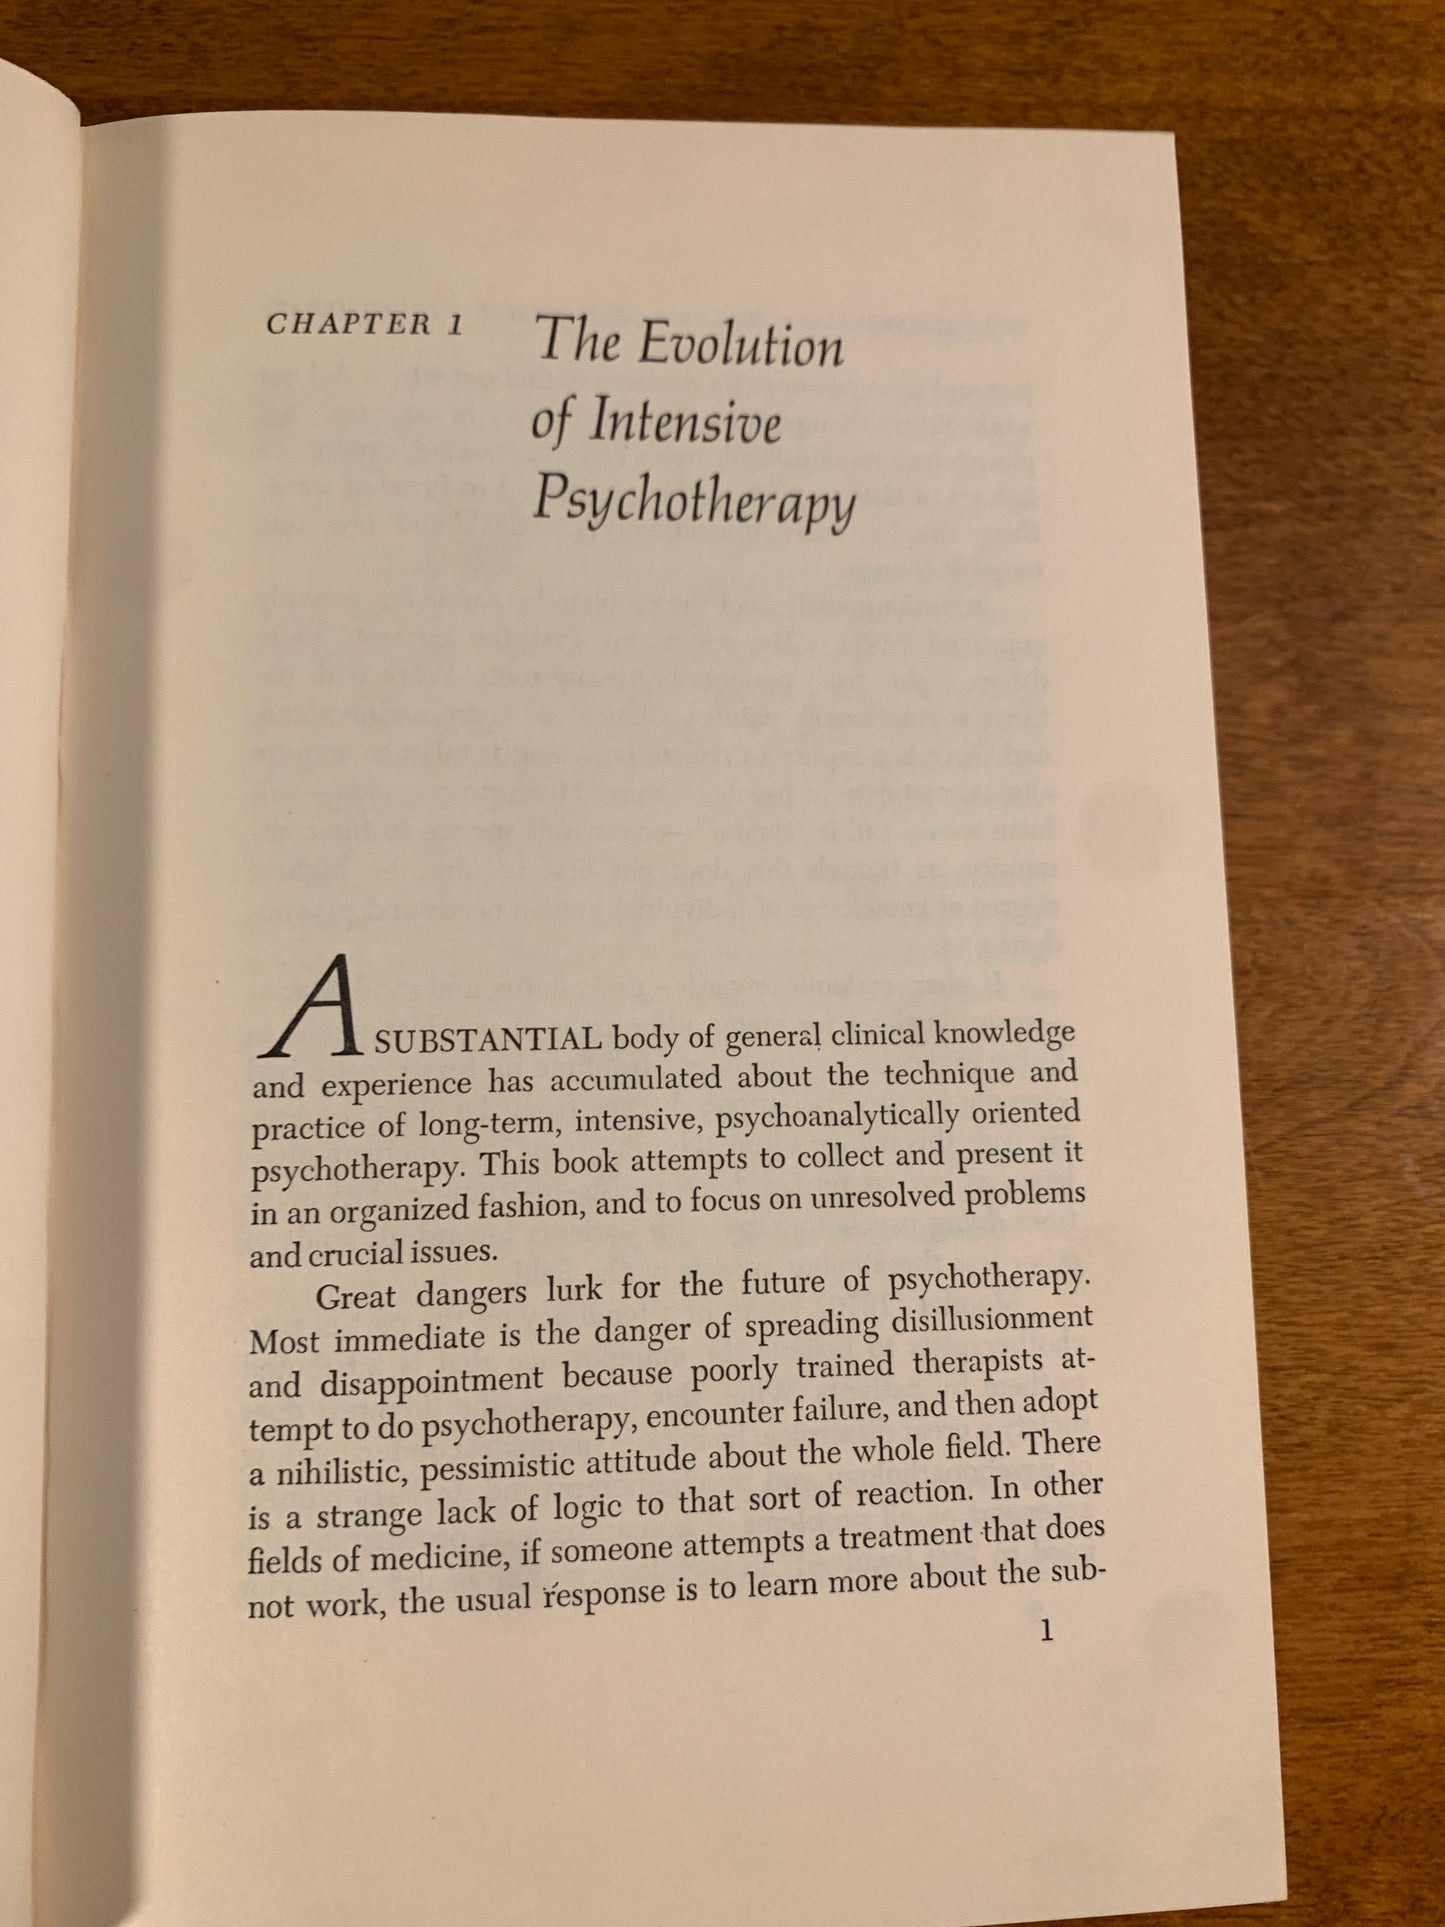 The Technique and Practive of Intensive Psychotherapy by Richard D. Chessick 1974